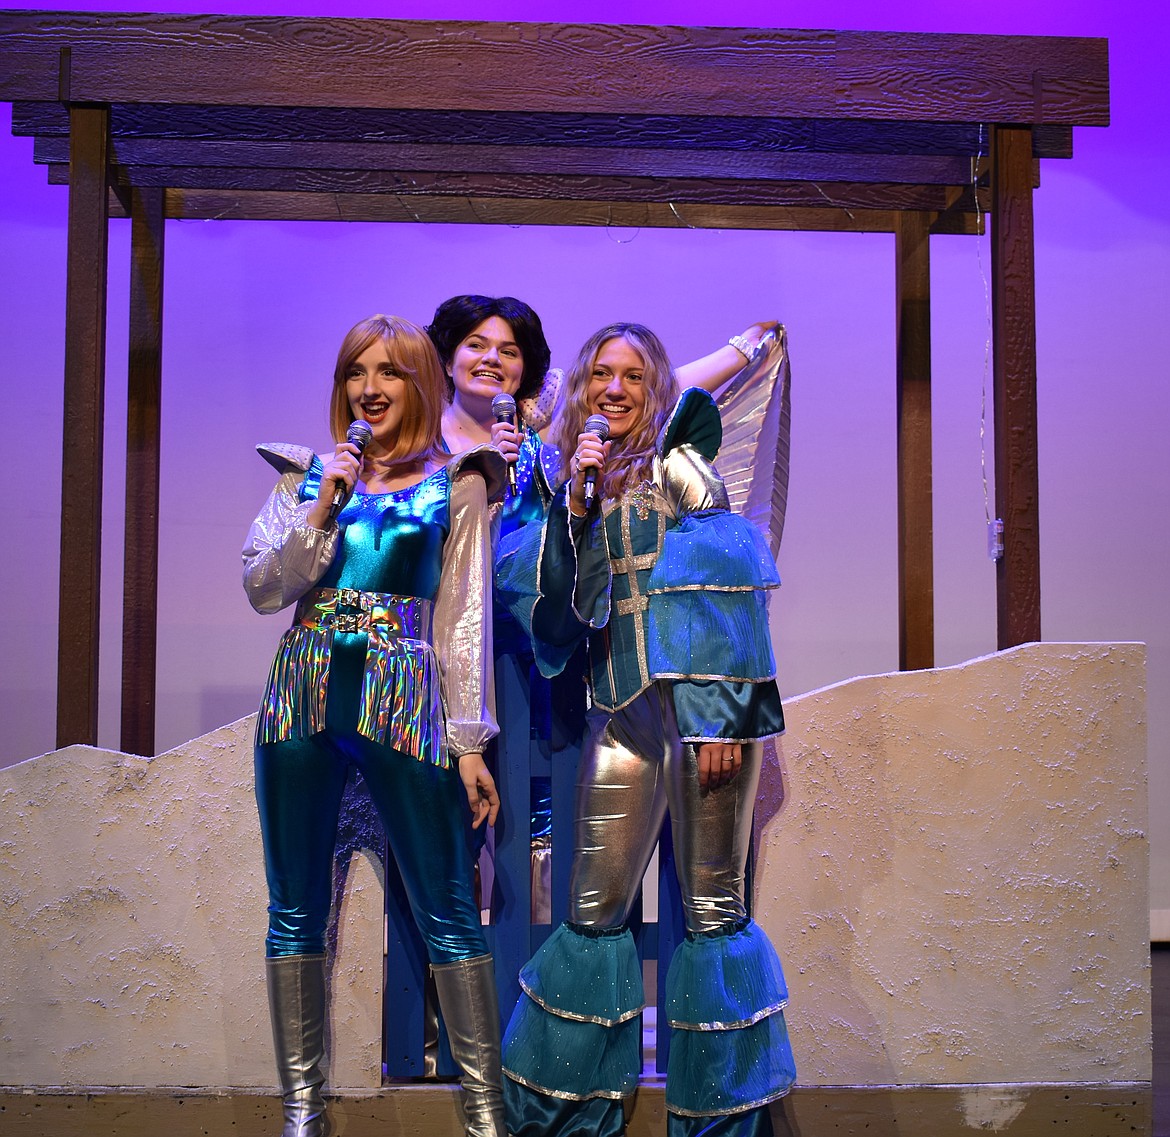 Delanie Kinney, Abbigail Aldridge, Savanna DeCrow star in the Bigfork Summer Playhouse's production of "Mamma Mia!" now showing twice a week at the Bigfork Center for the Performing Arts. (photo provided)